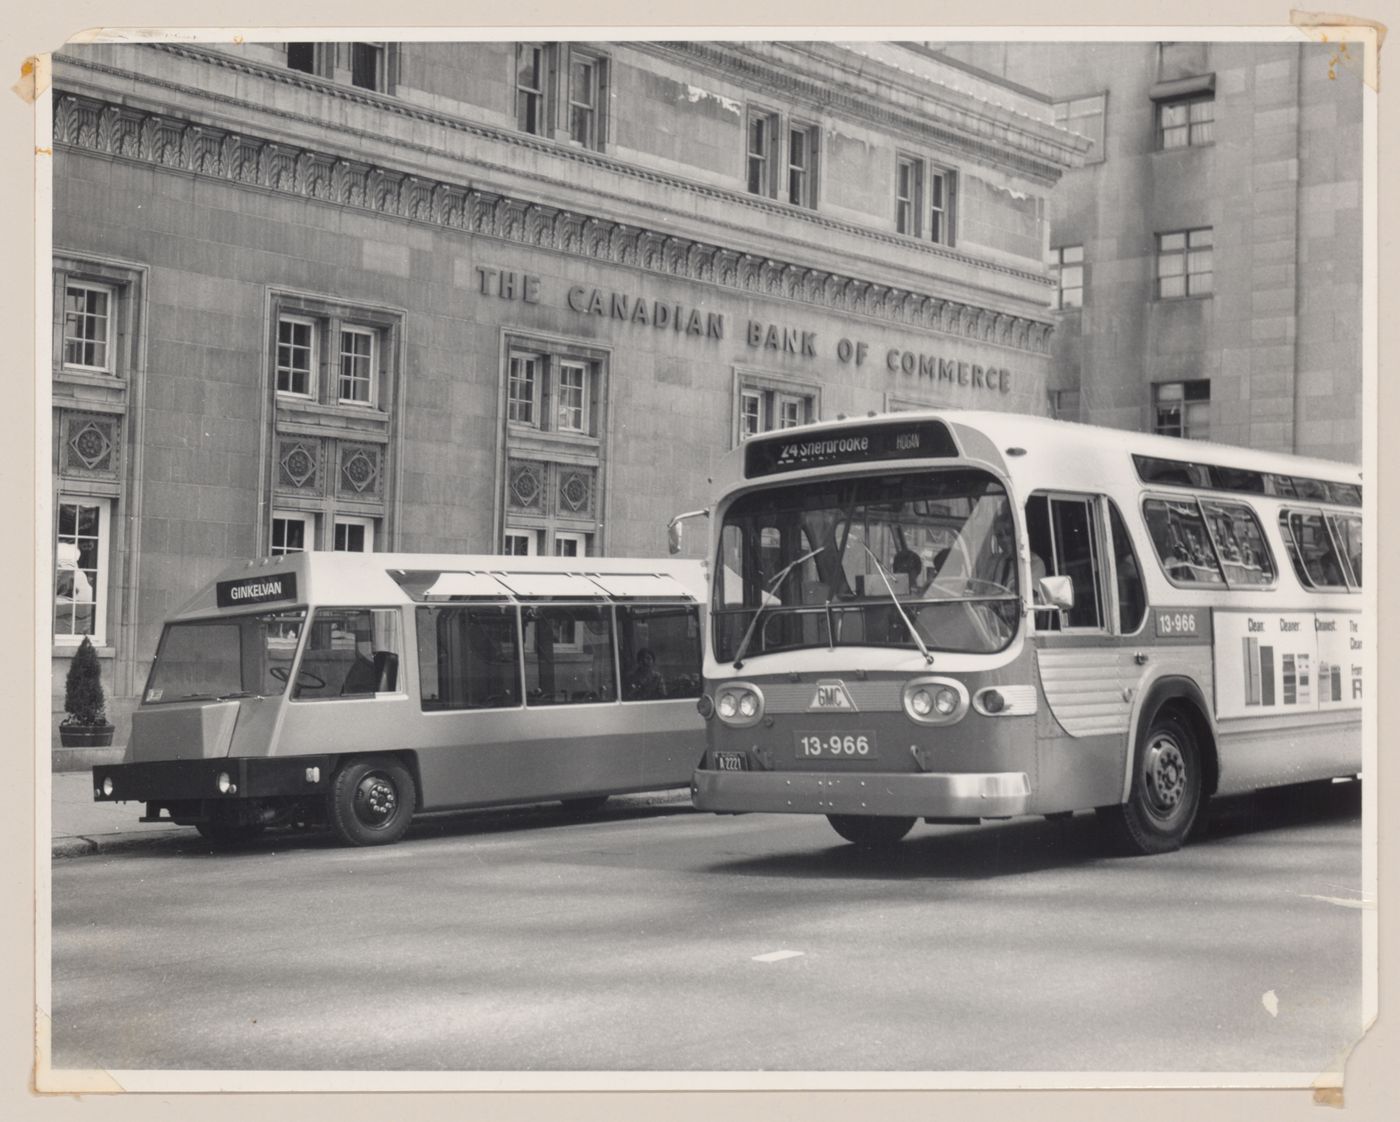 View of the Ginkelvan prototype and a Montreal city bus